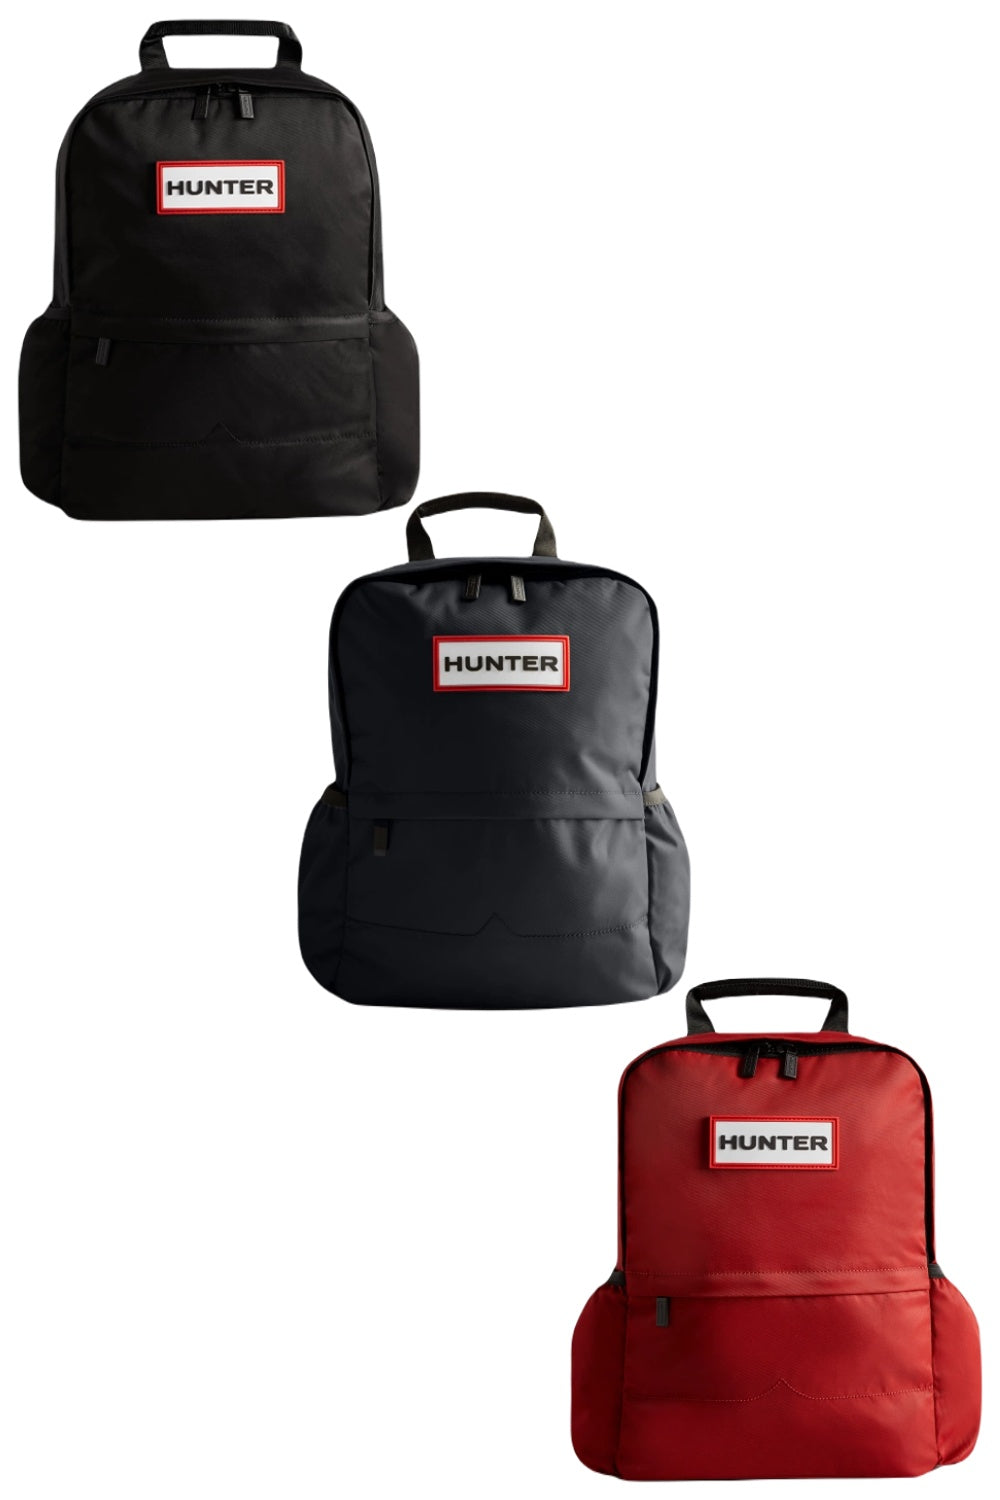 Hunter Nylon Backpack In Black, Navy and Red